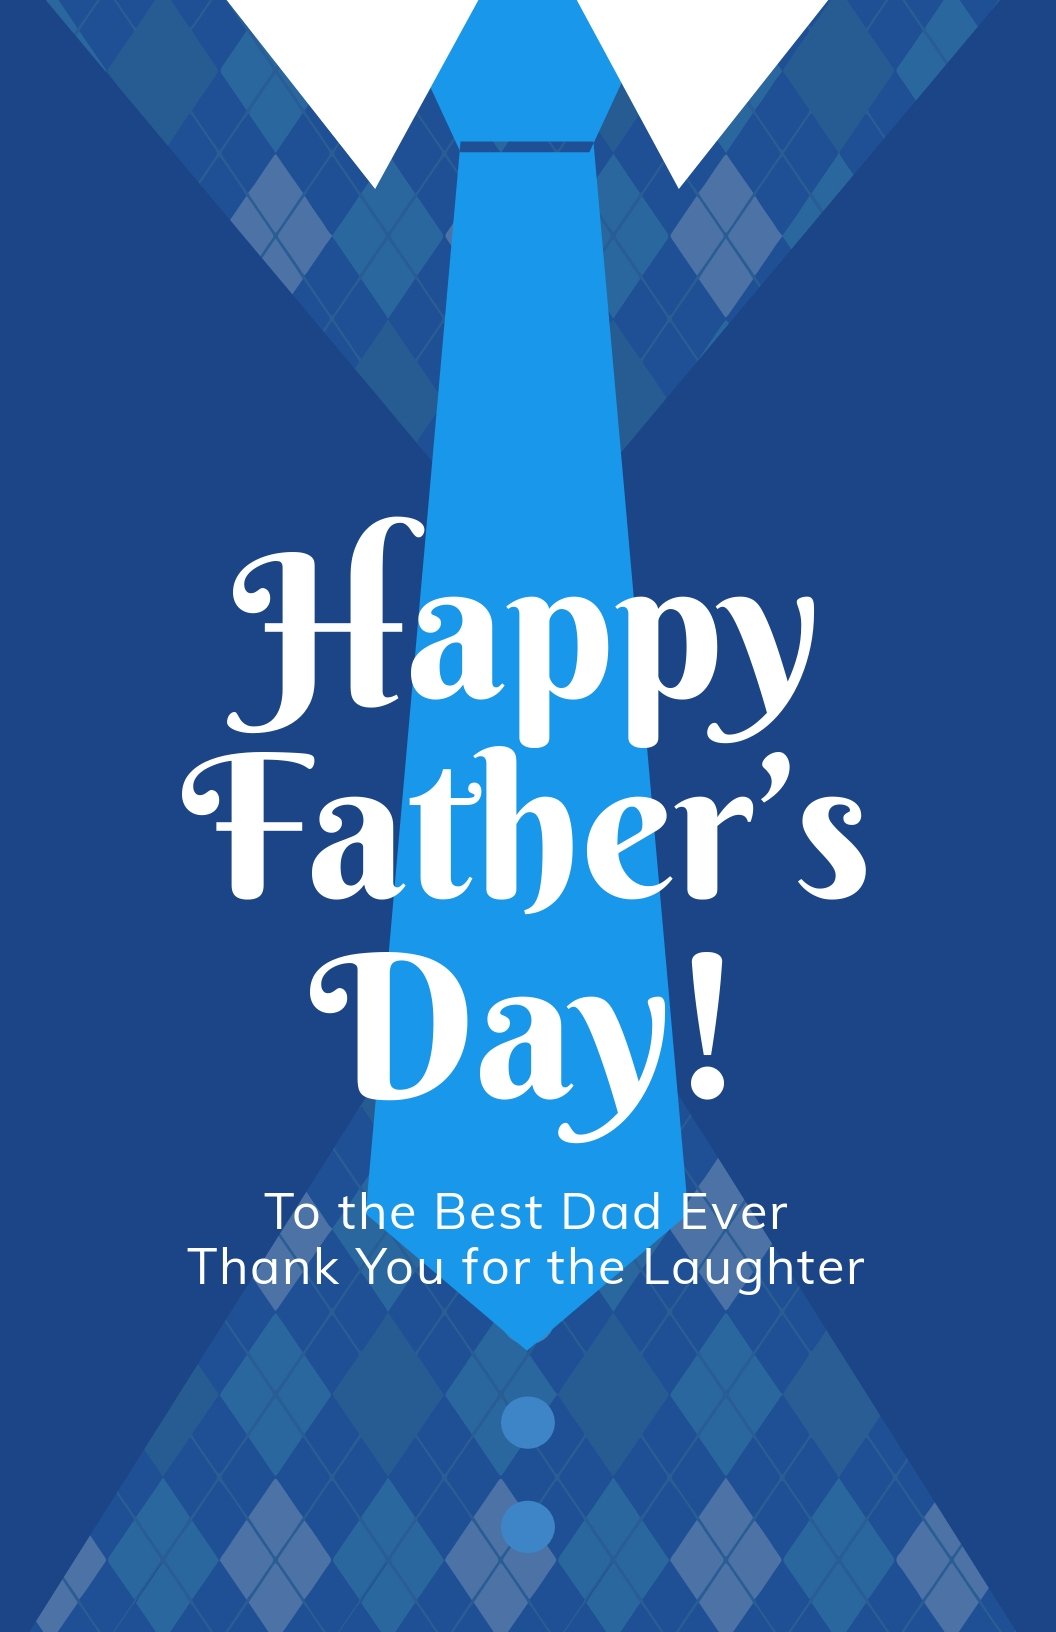 free-creative-father-s-day-poster-template-template